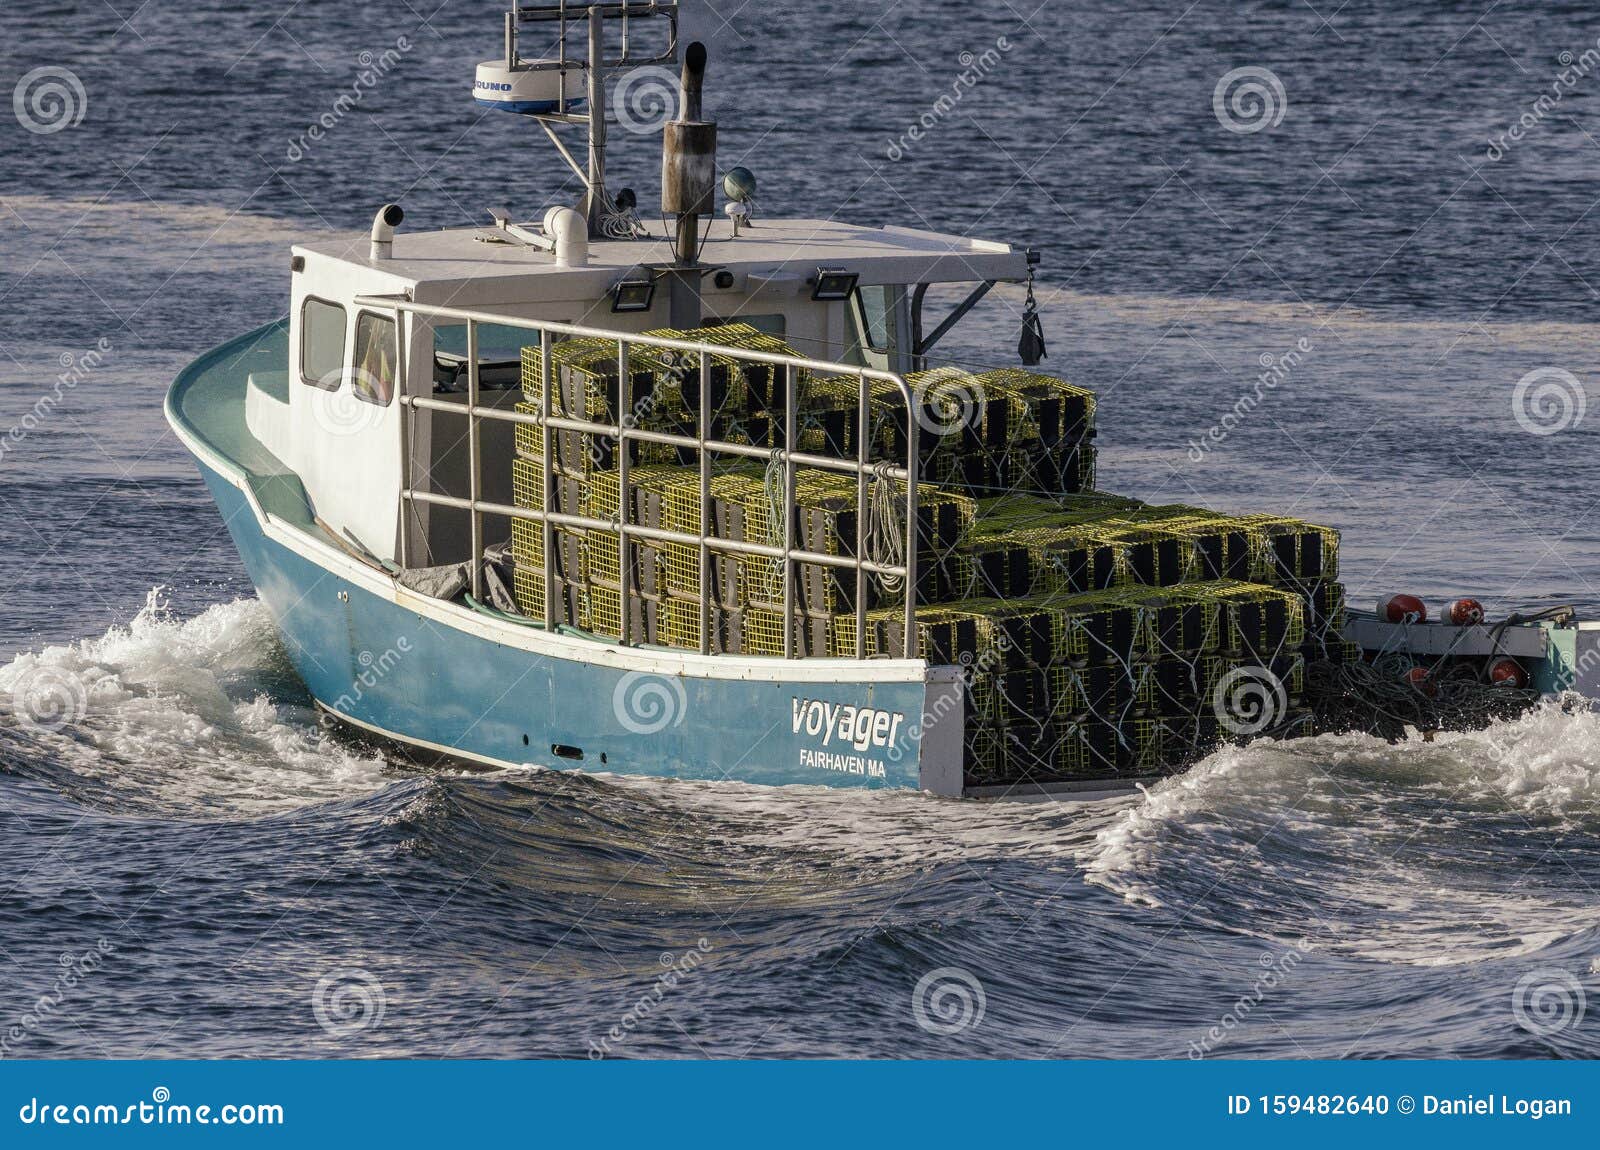 Commercial Fishing Boat Voyager Leaving Fairhaven Stacked with Lobster  Traps Editorial Image - Image of acushnet, county: 159482640